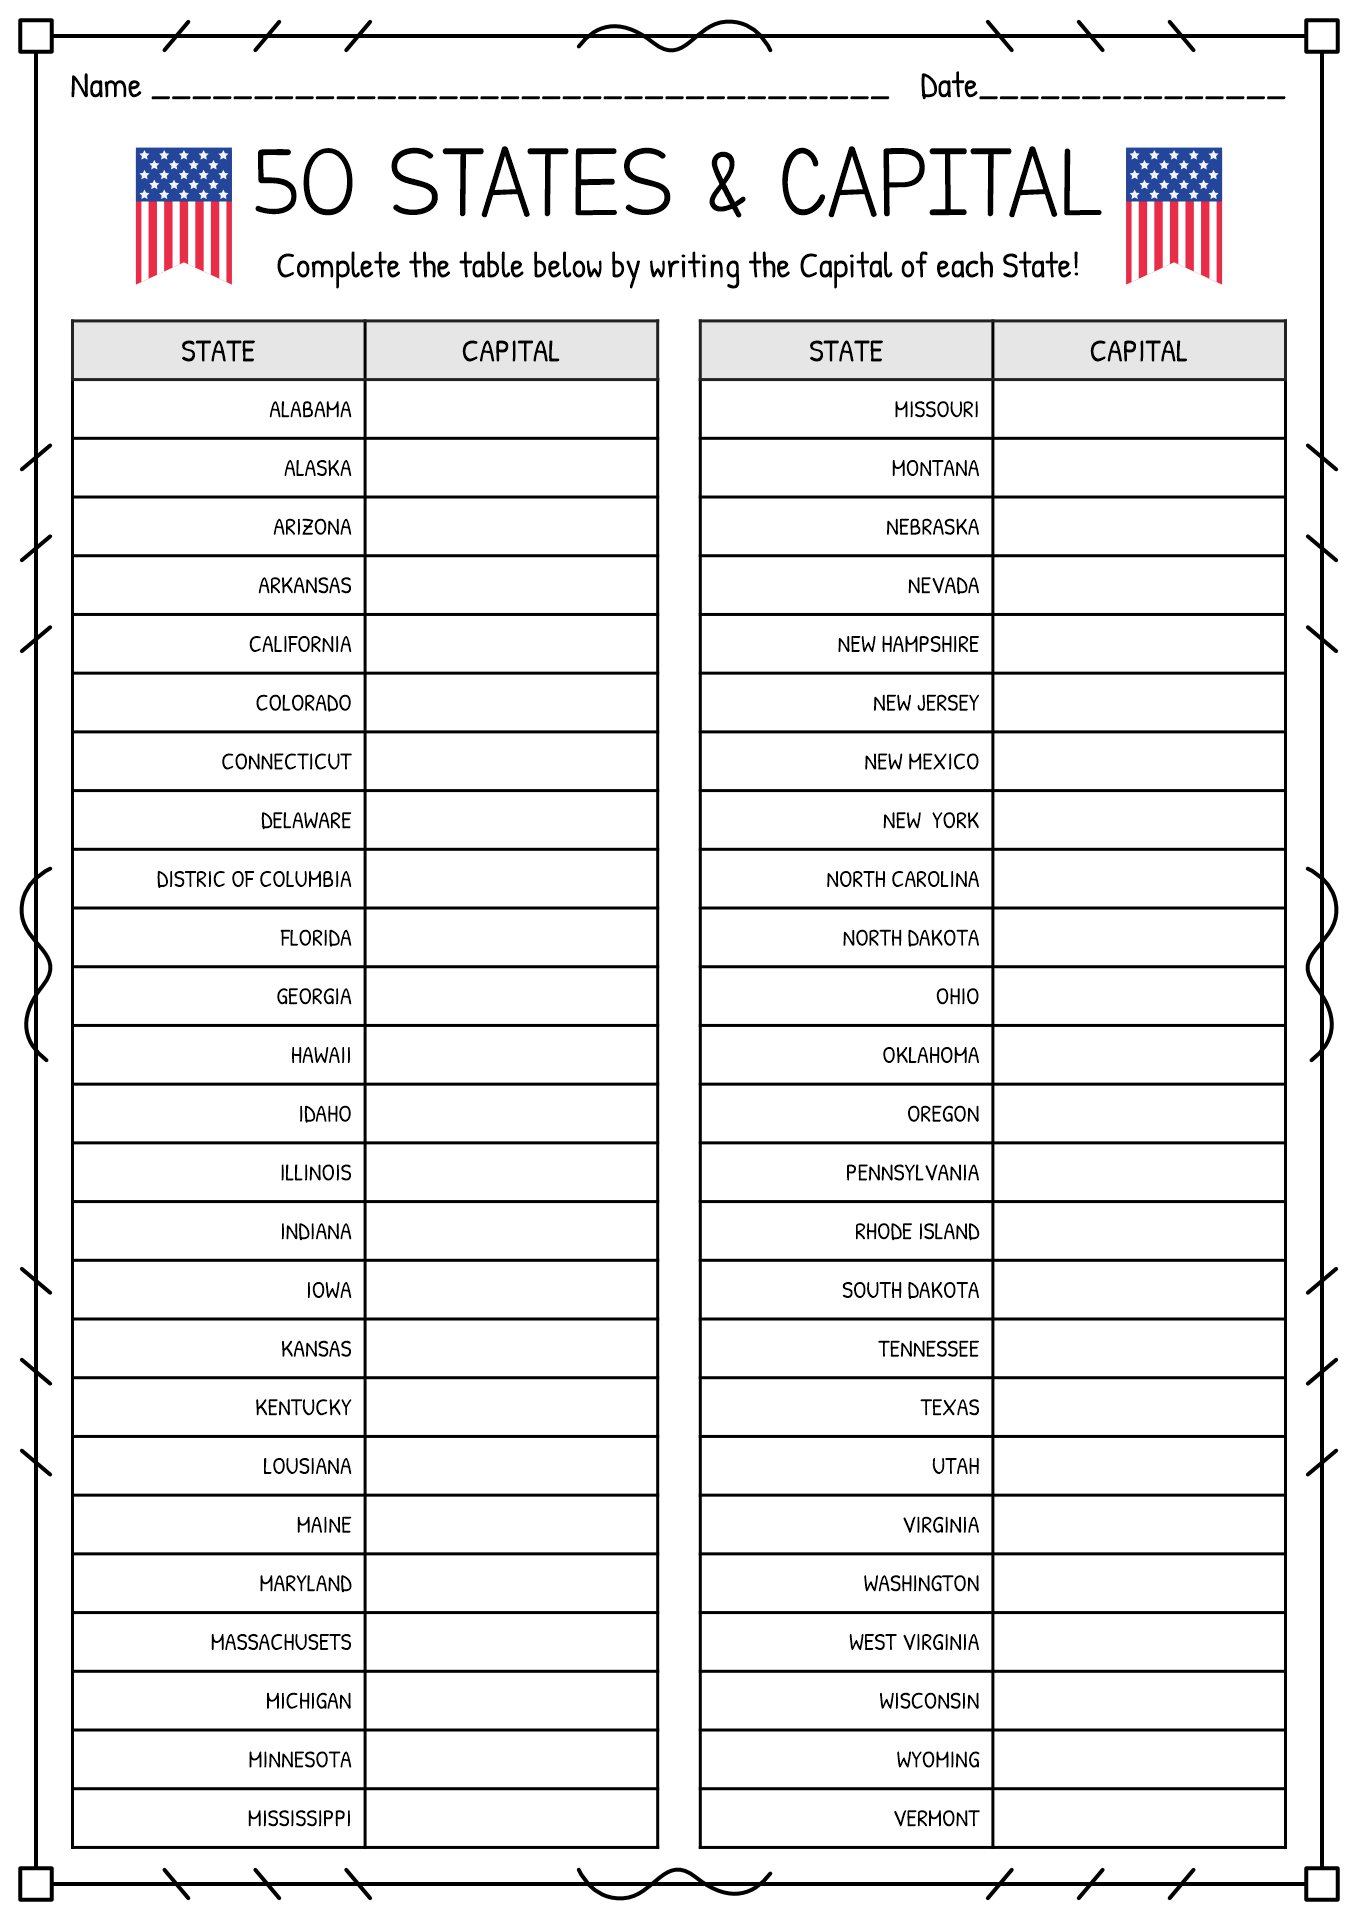 14-best-images-of-states-and-capitals-worksheets-states-and-capitals